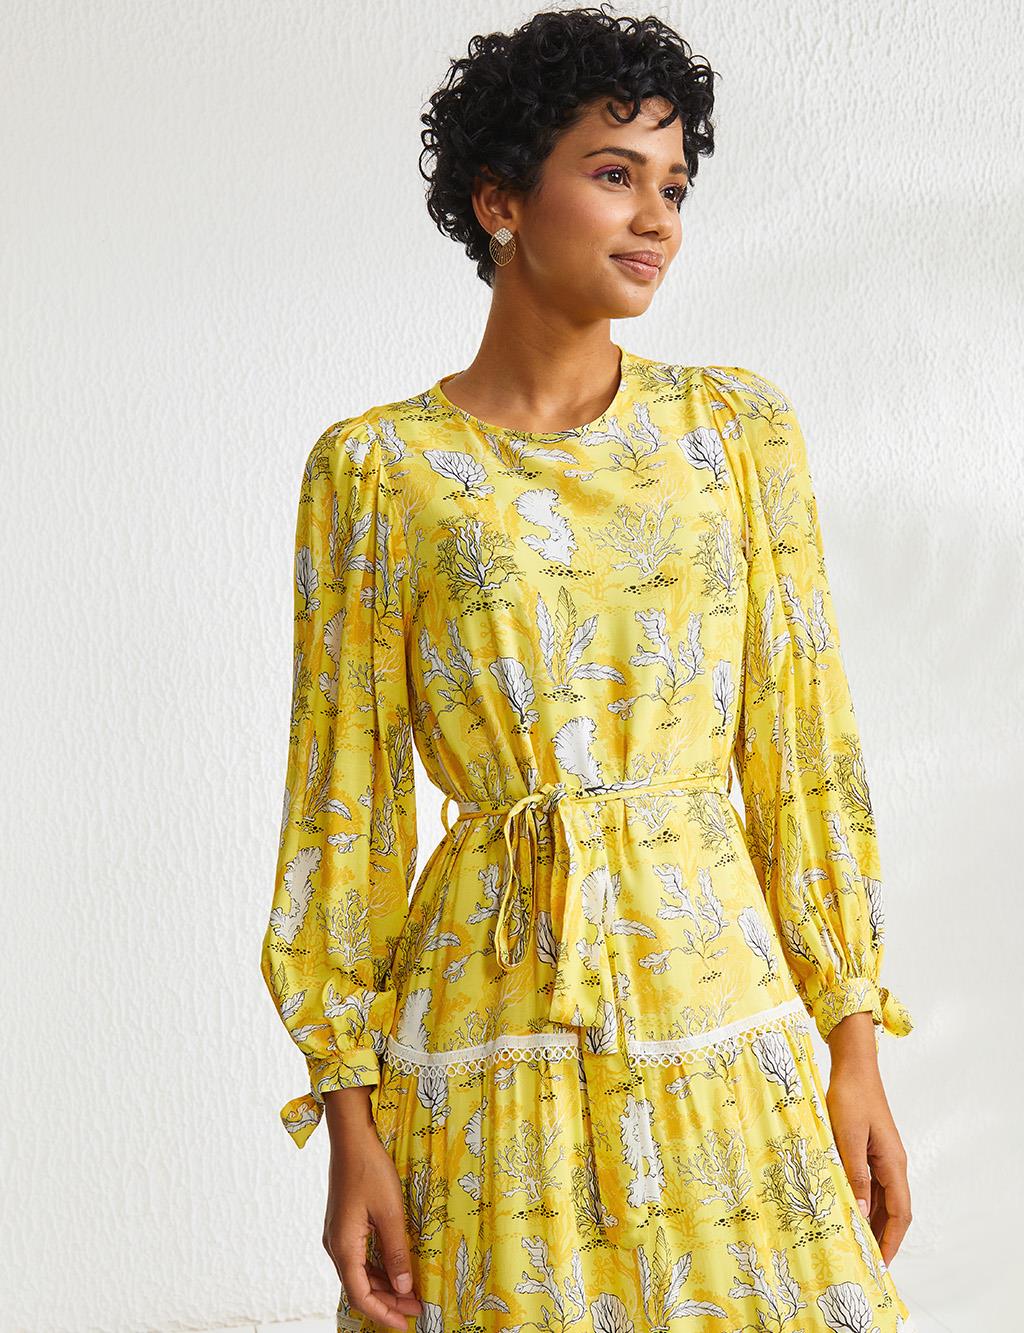 Floral Patterned Crew Neck Dress Yellow-White